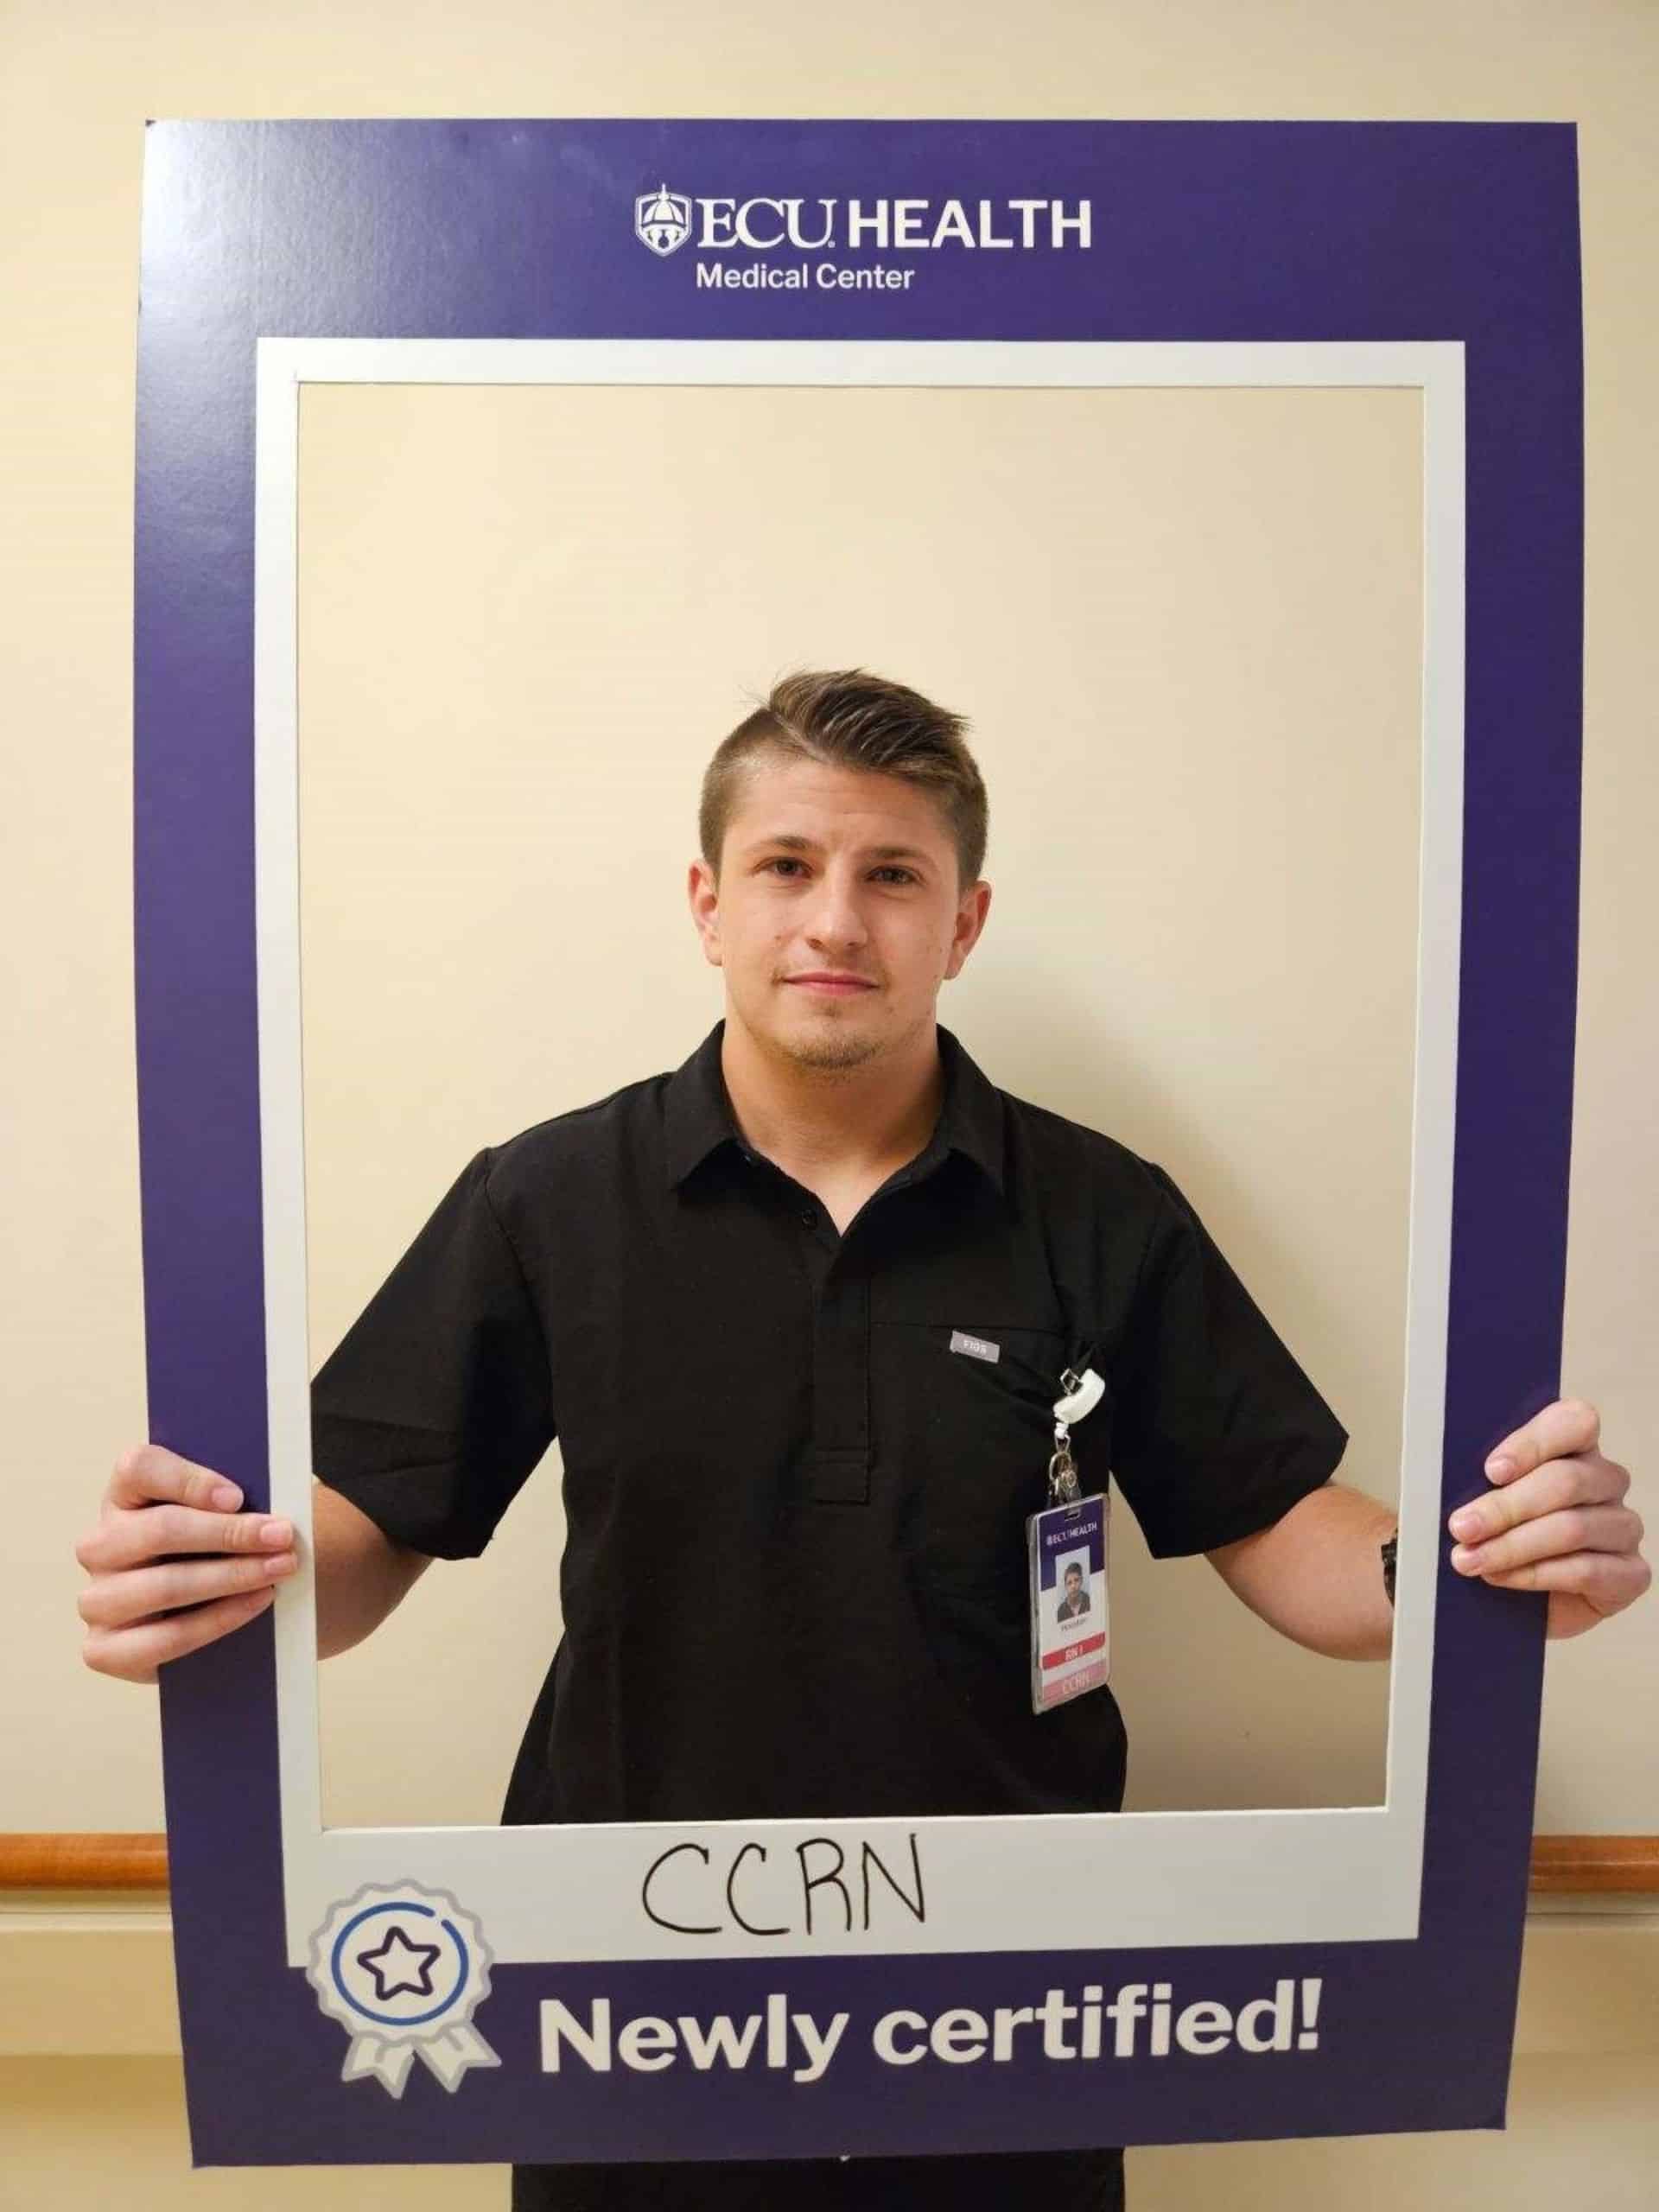 Houston Massengill, works on CICU and received his Critical Care Registered Nurse certification